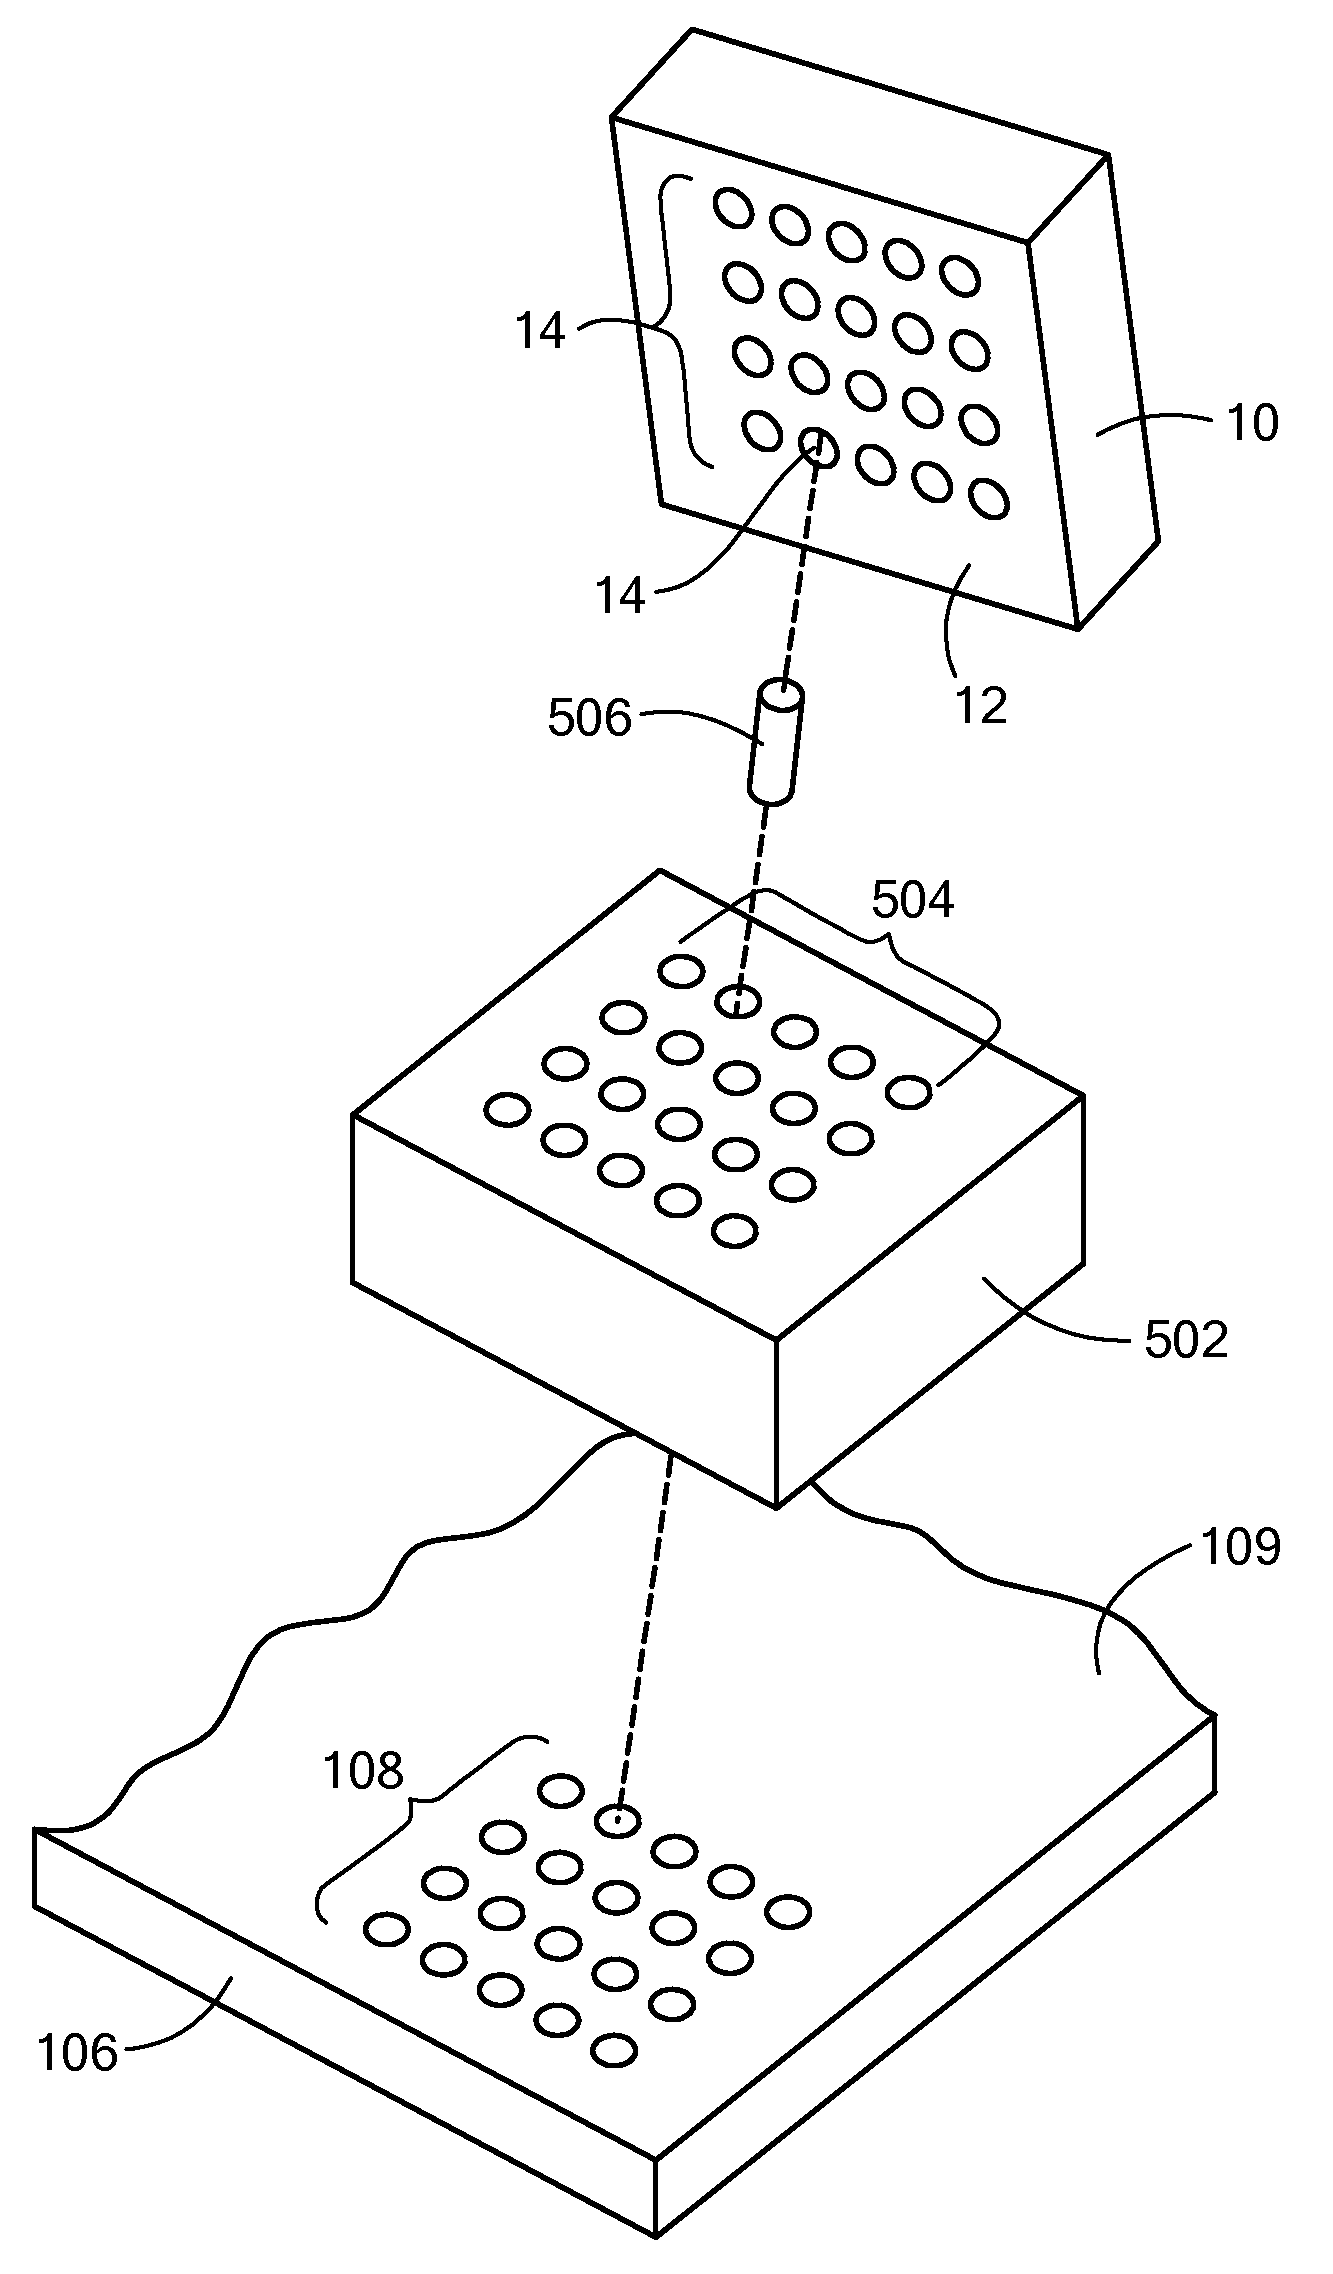 Interconnect device with discrete in-line components